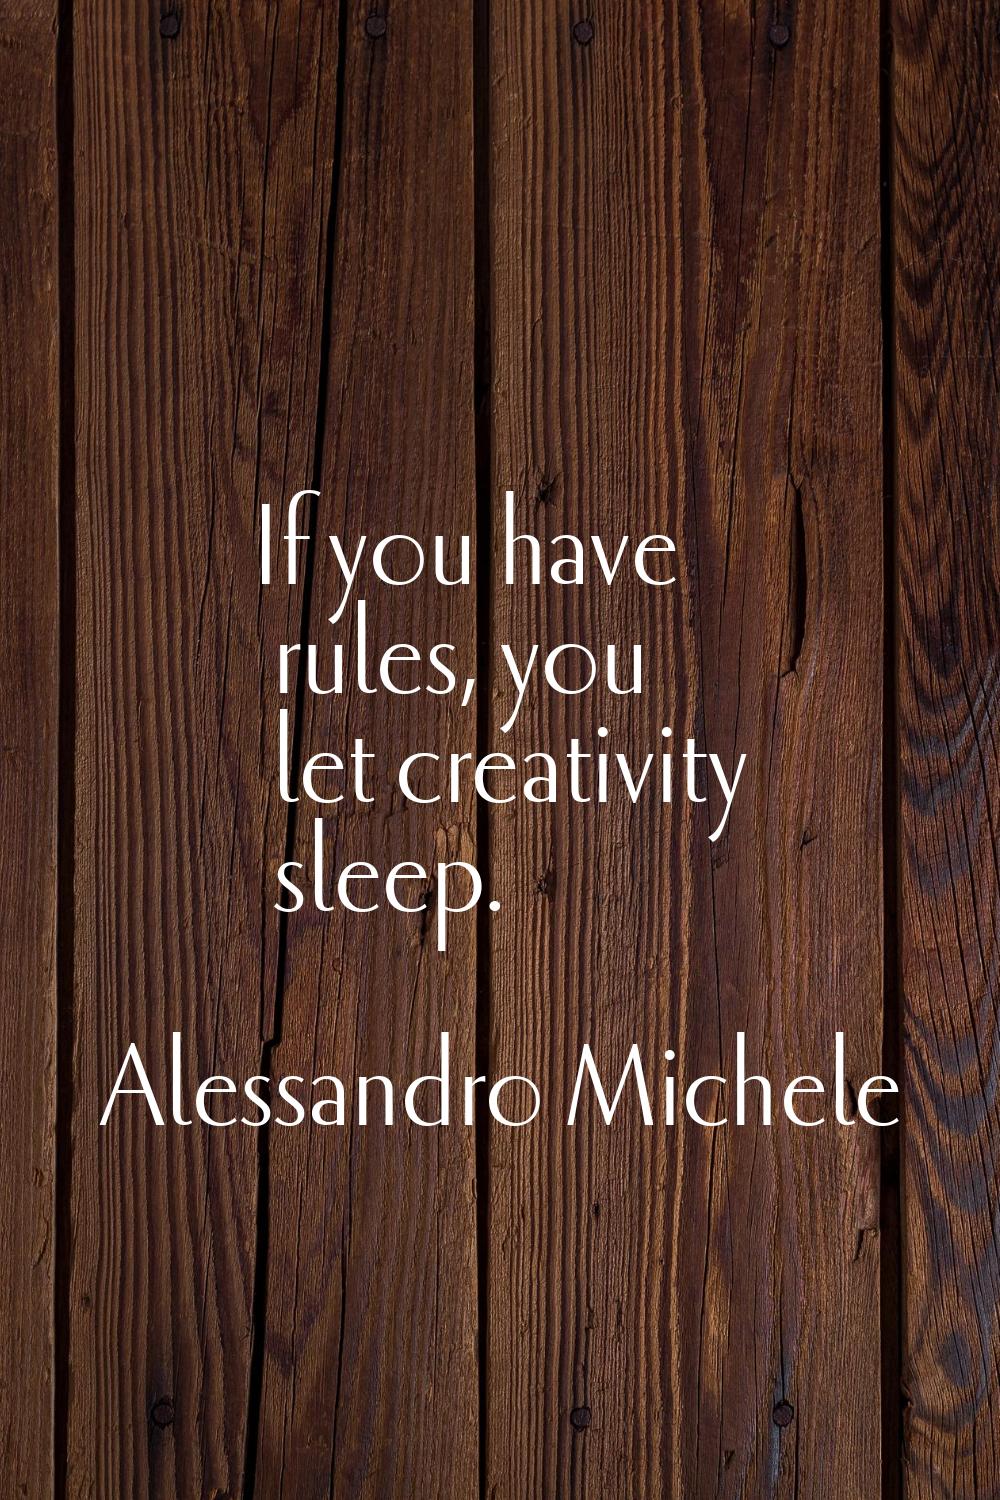 If you have rules, you let creativity sleep.